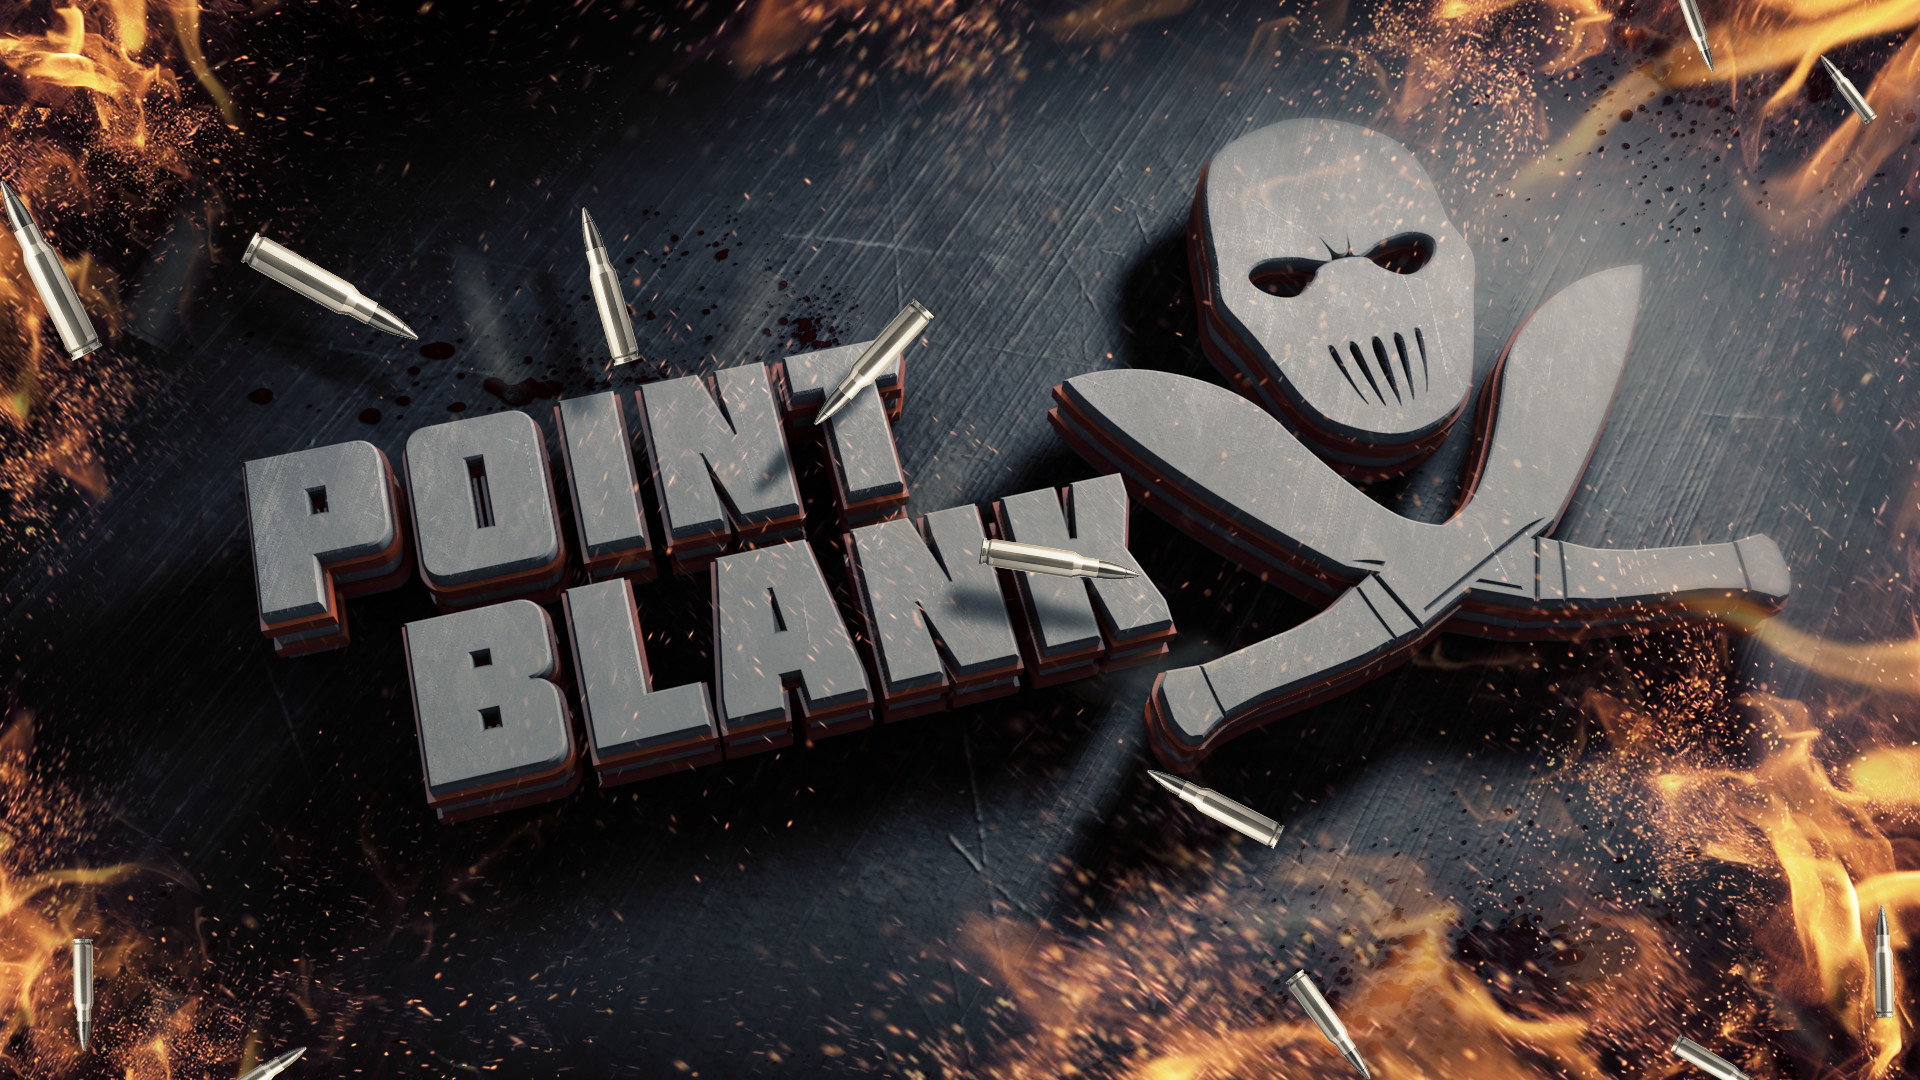 1920x1080 Point Blank Full HD Wallpaper and Background |  | ID:490188